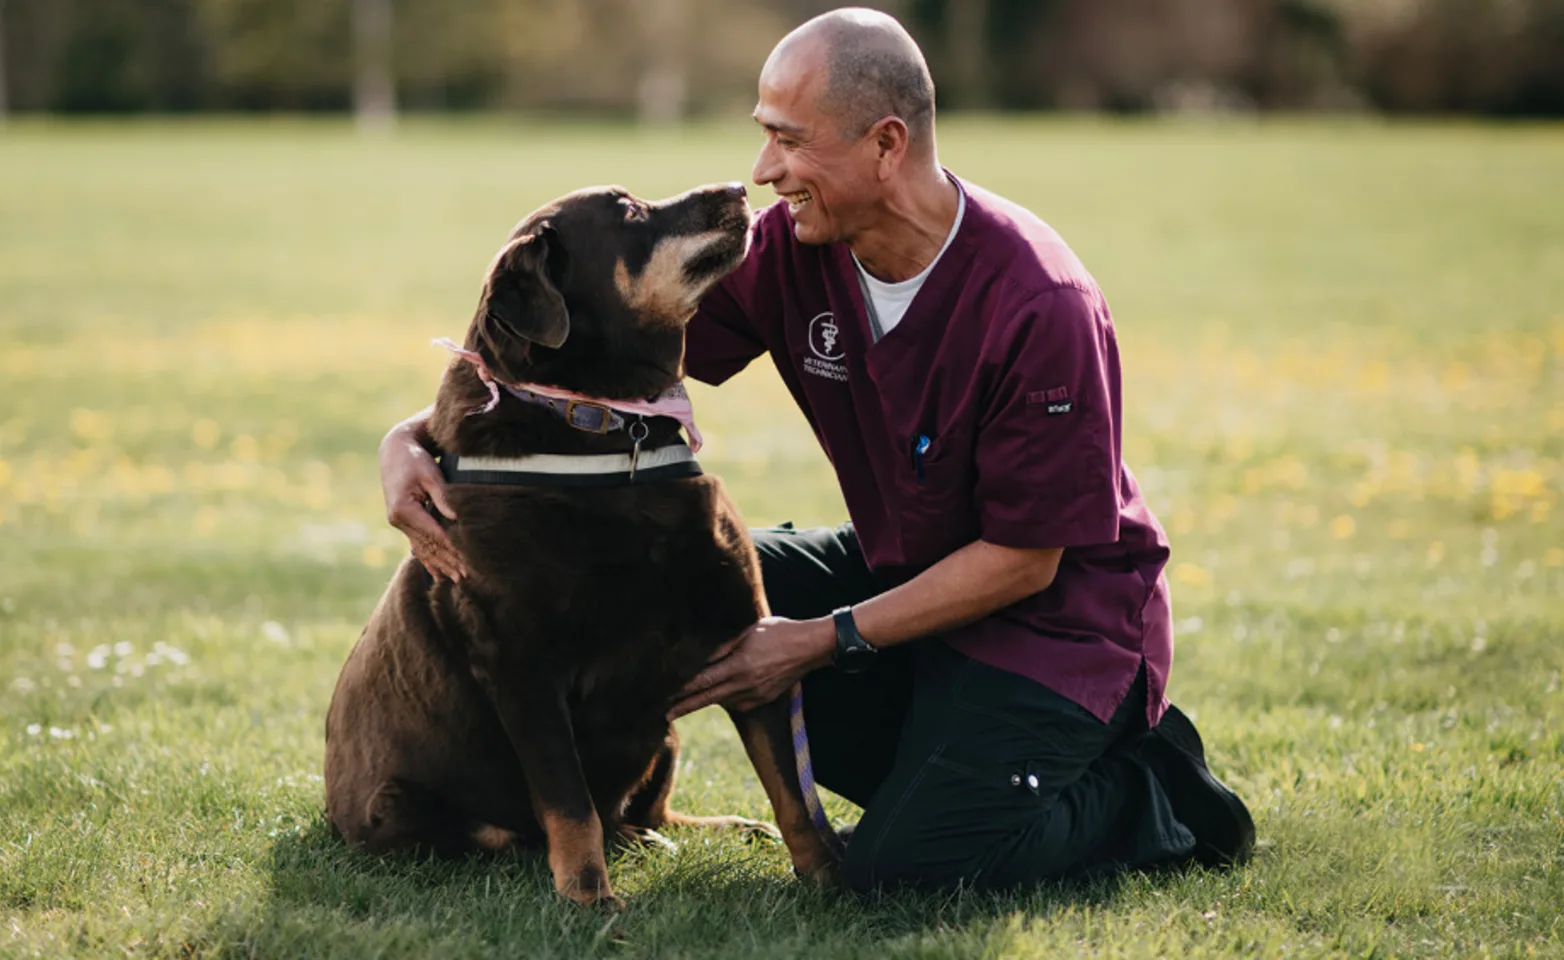 Male Veterinary Assistant smiling with a brown dog in the grass